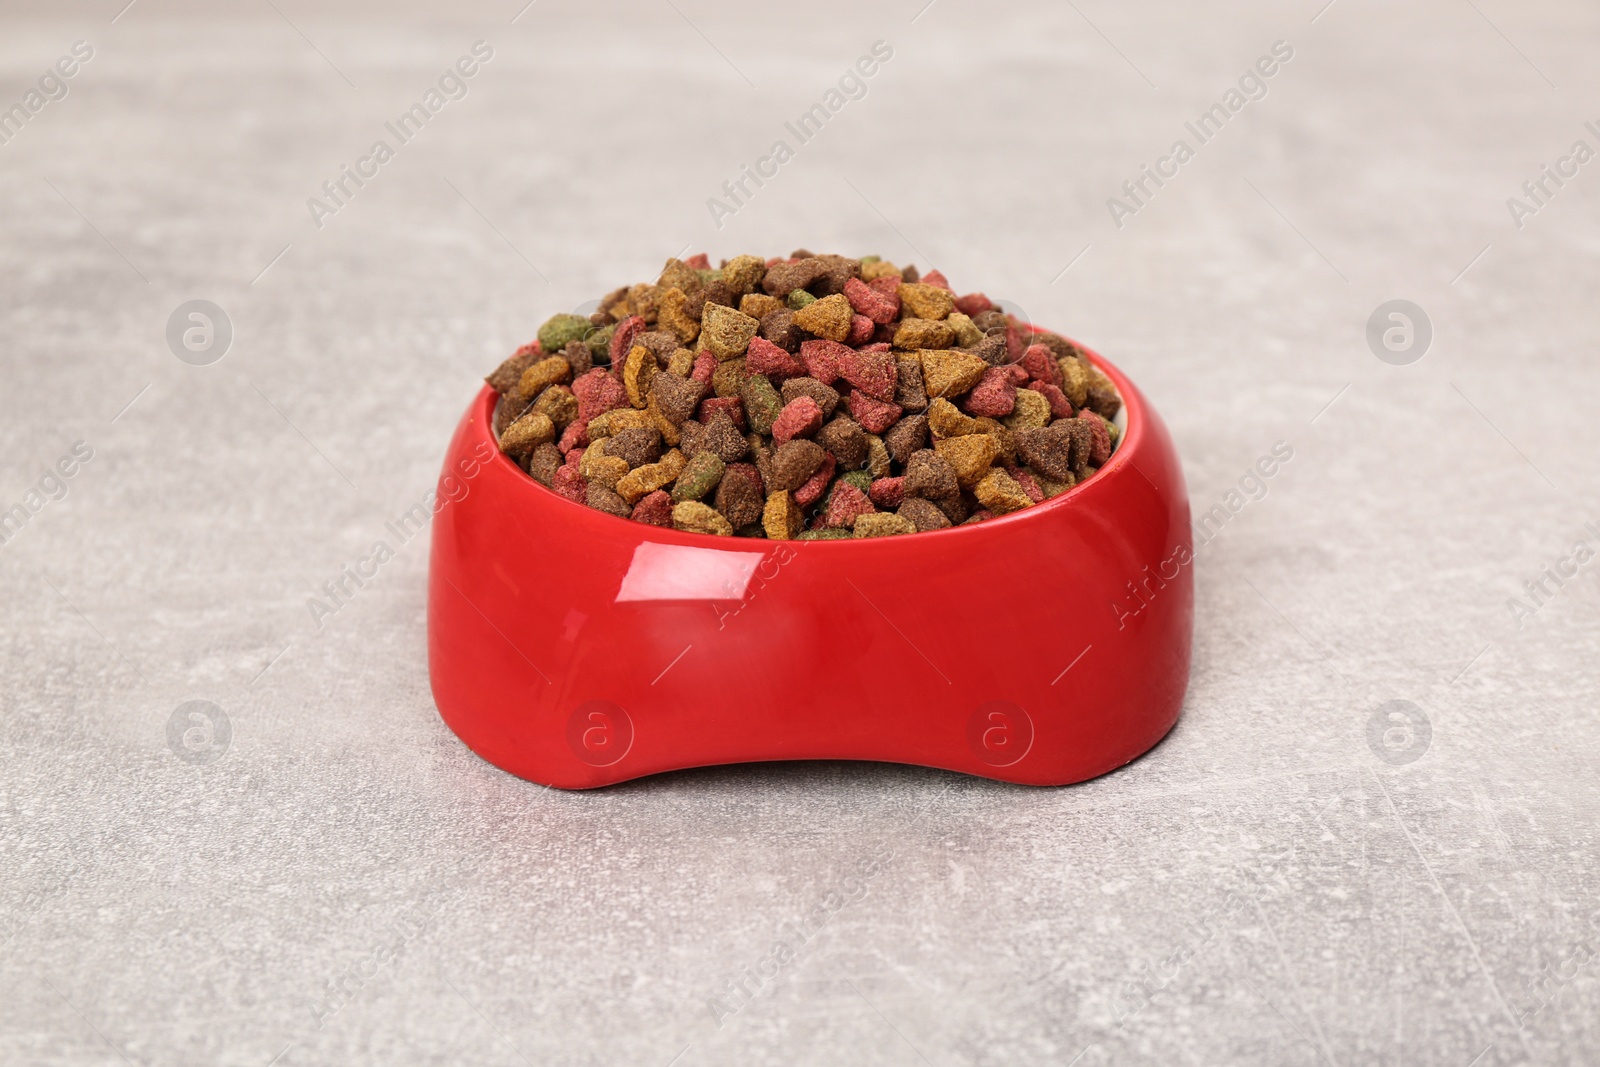 Photo of Dry cat food in red pet bowl on grey surface